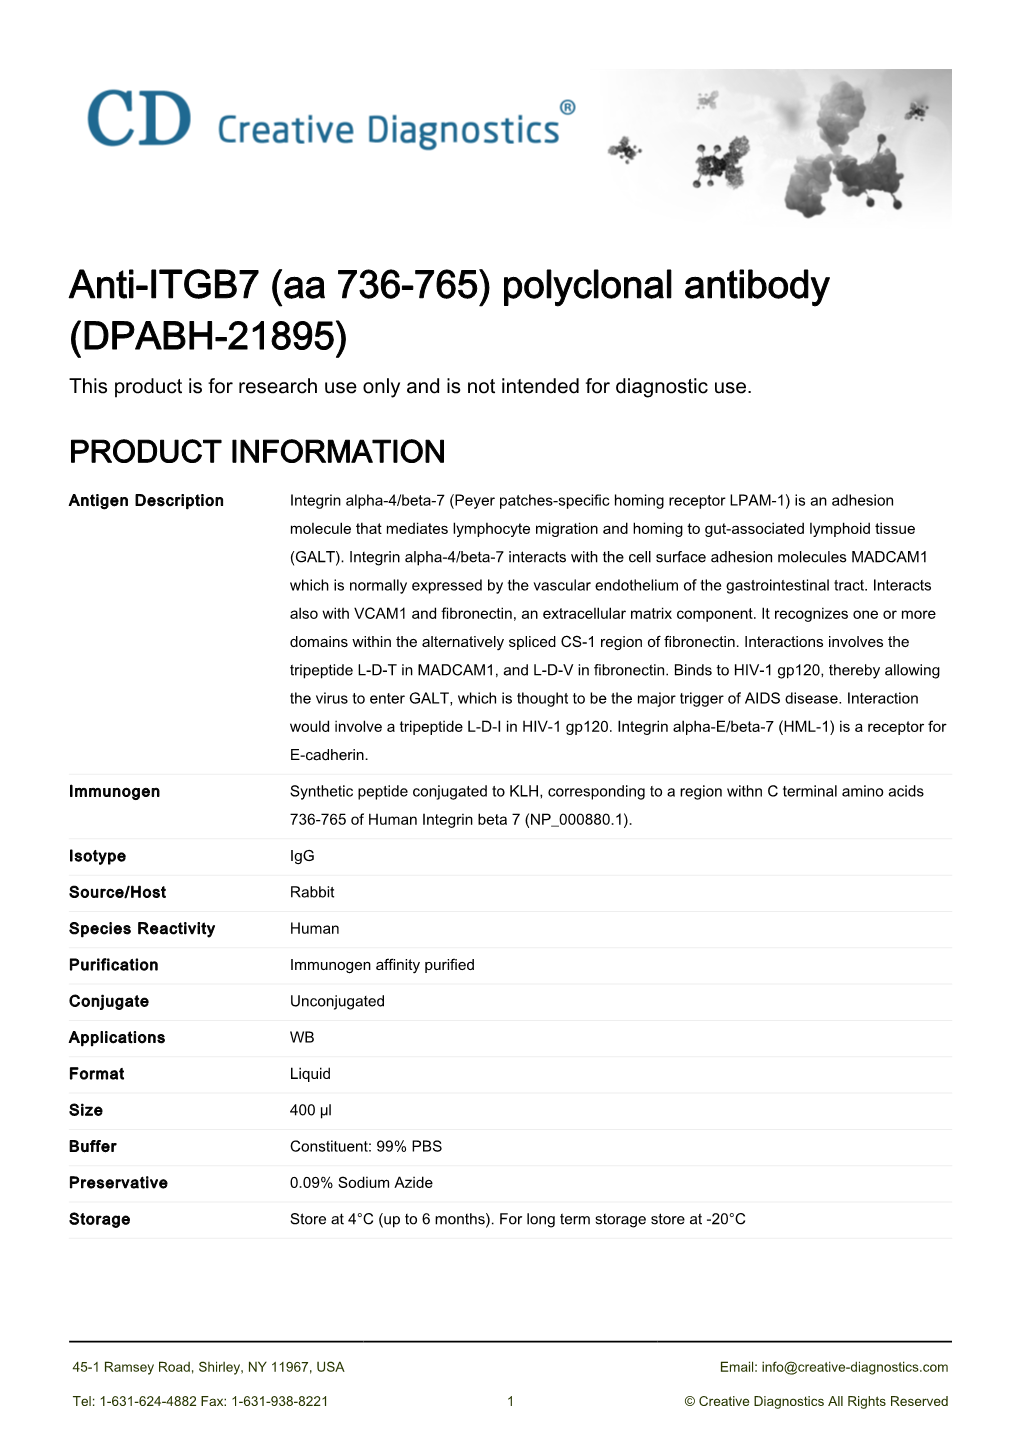 Anti-ITGB7 (Aa 736-765) Polyclonal Antibody (DPABH-21895) This Product Is for Research Use Only and Is Not Intended for Diagnostic Use